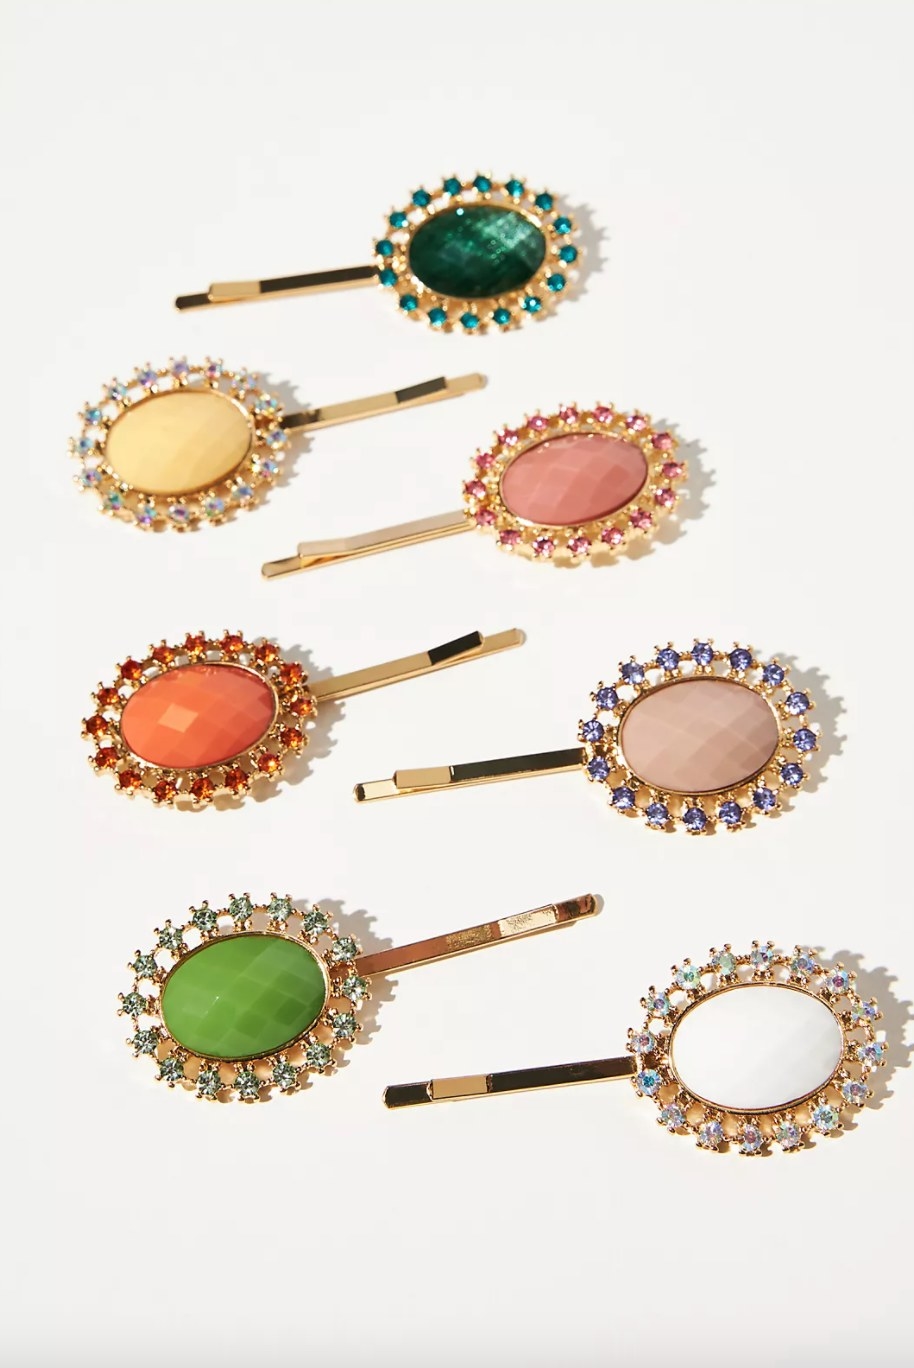 The embellished bobby pins